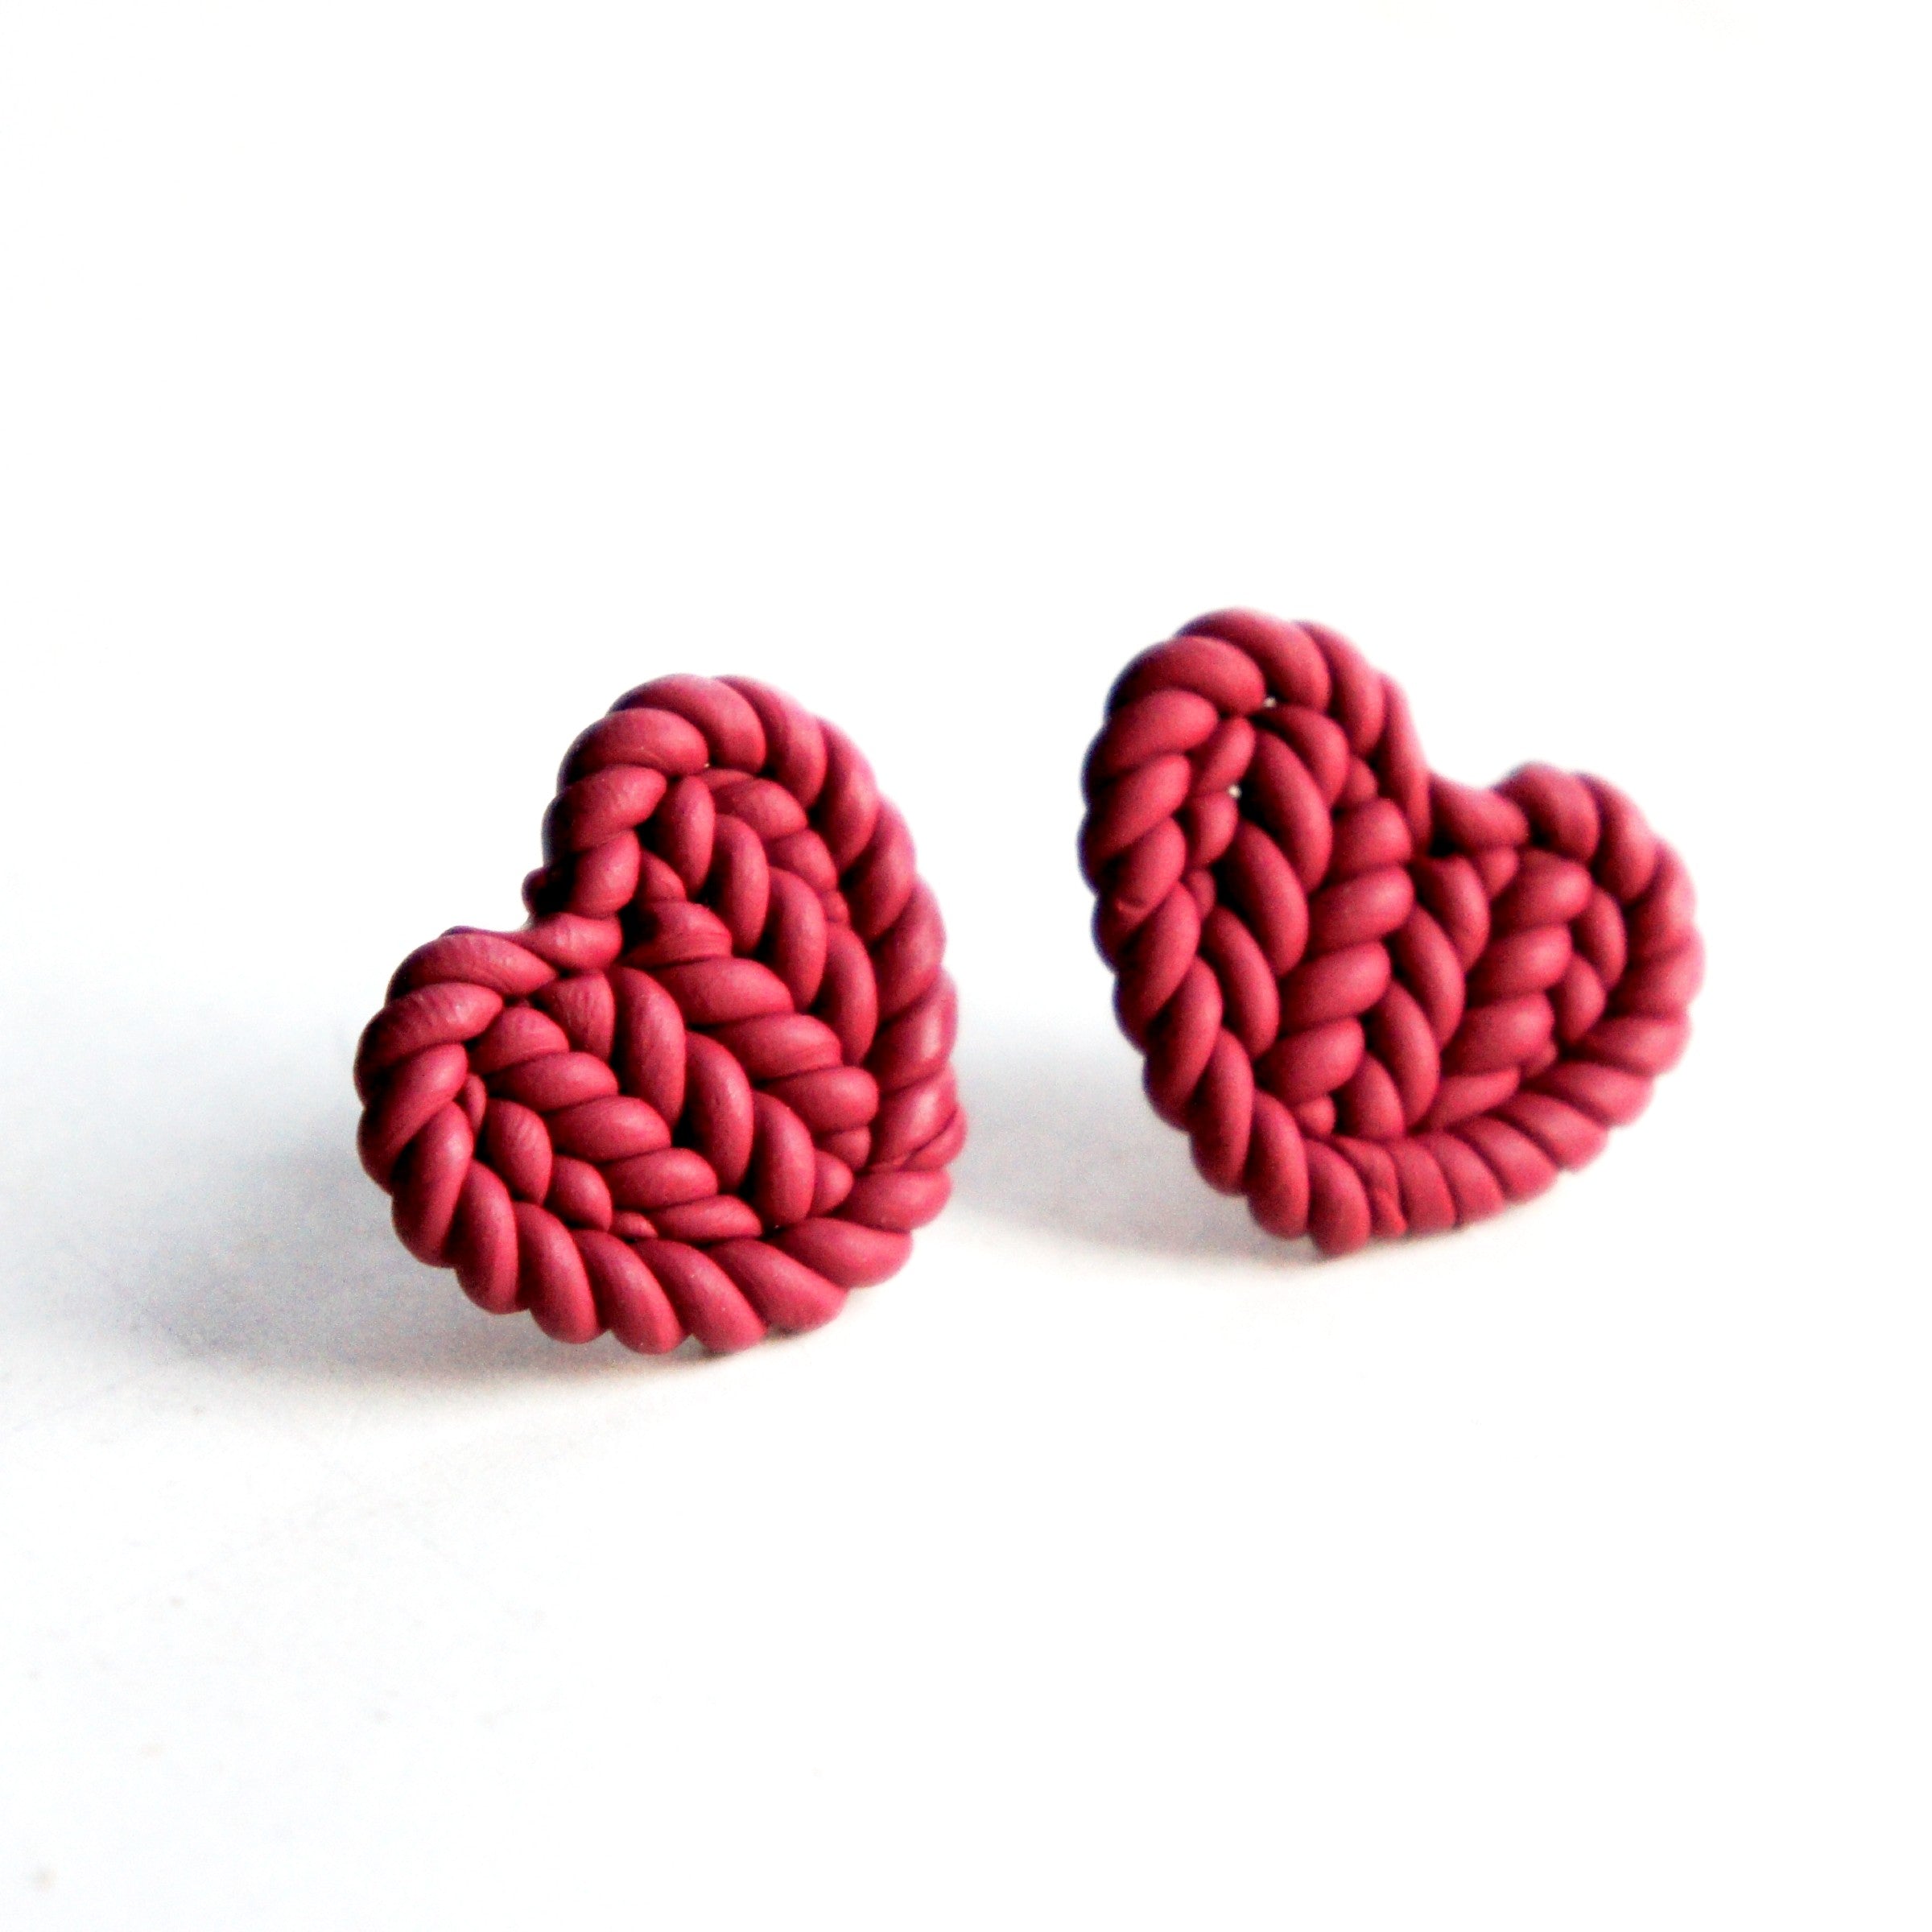 Heart Sweater Stud Earrings - Jillicious charms and accessories